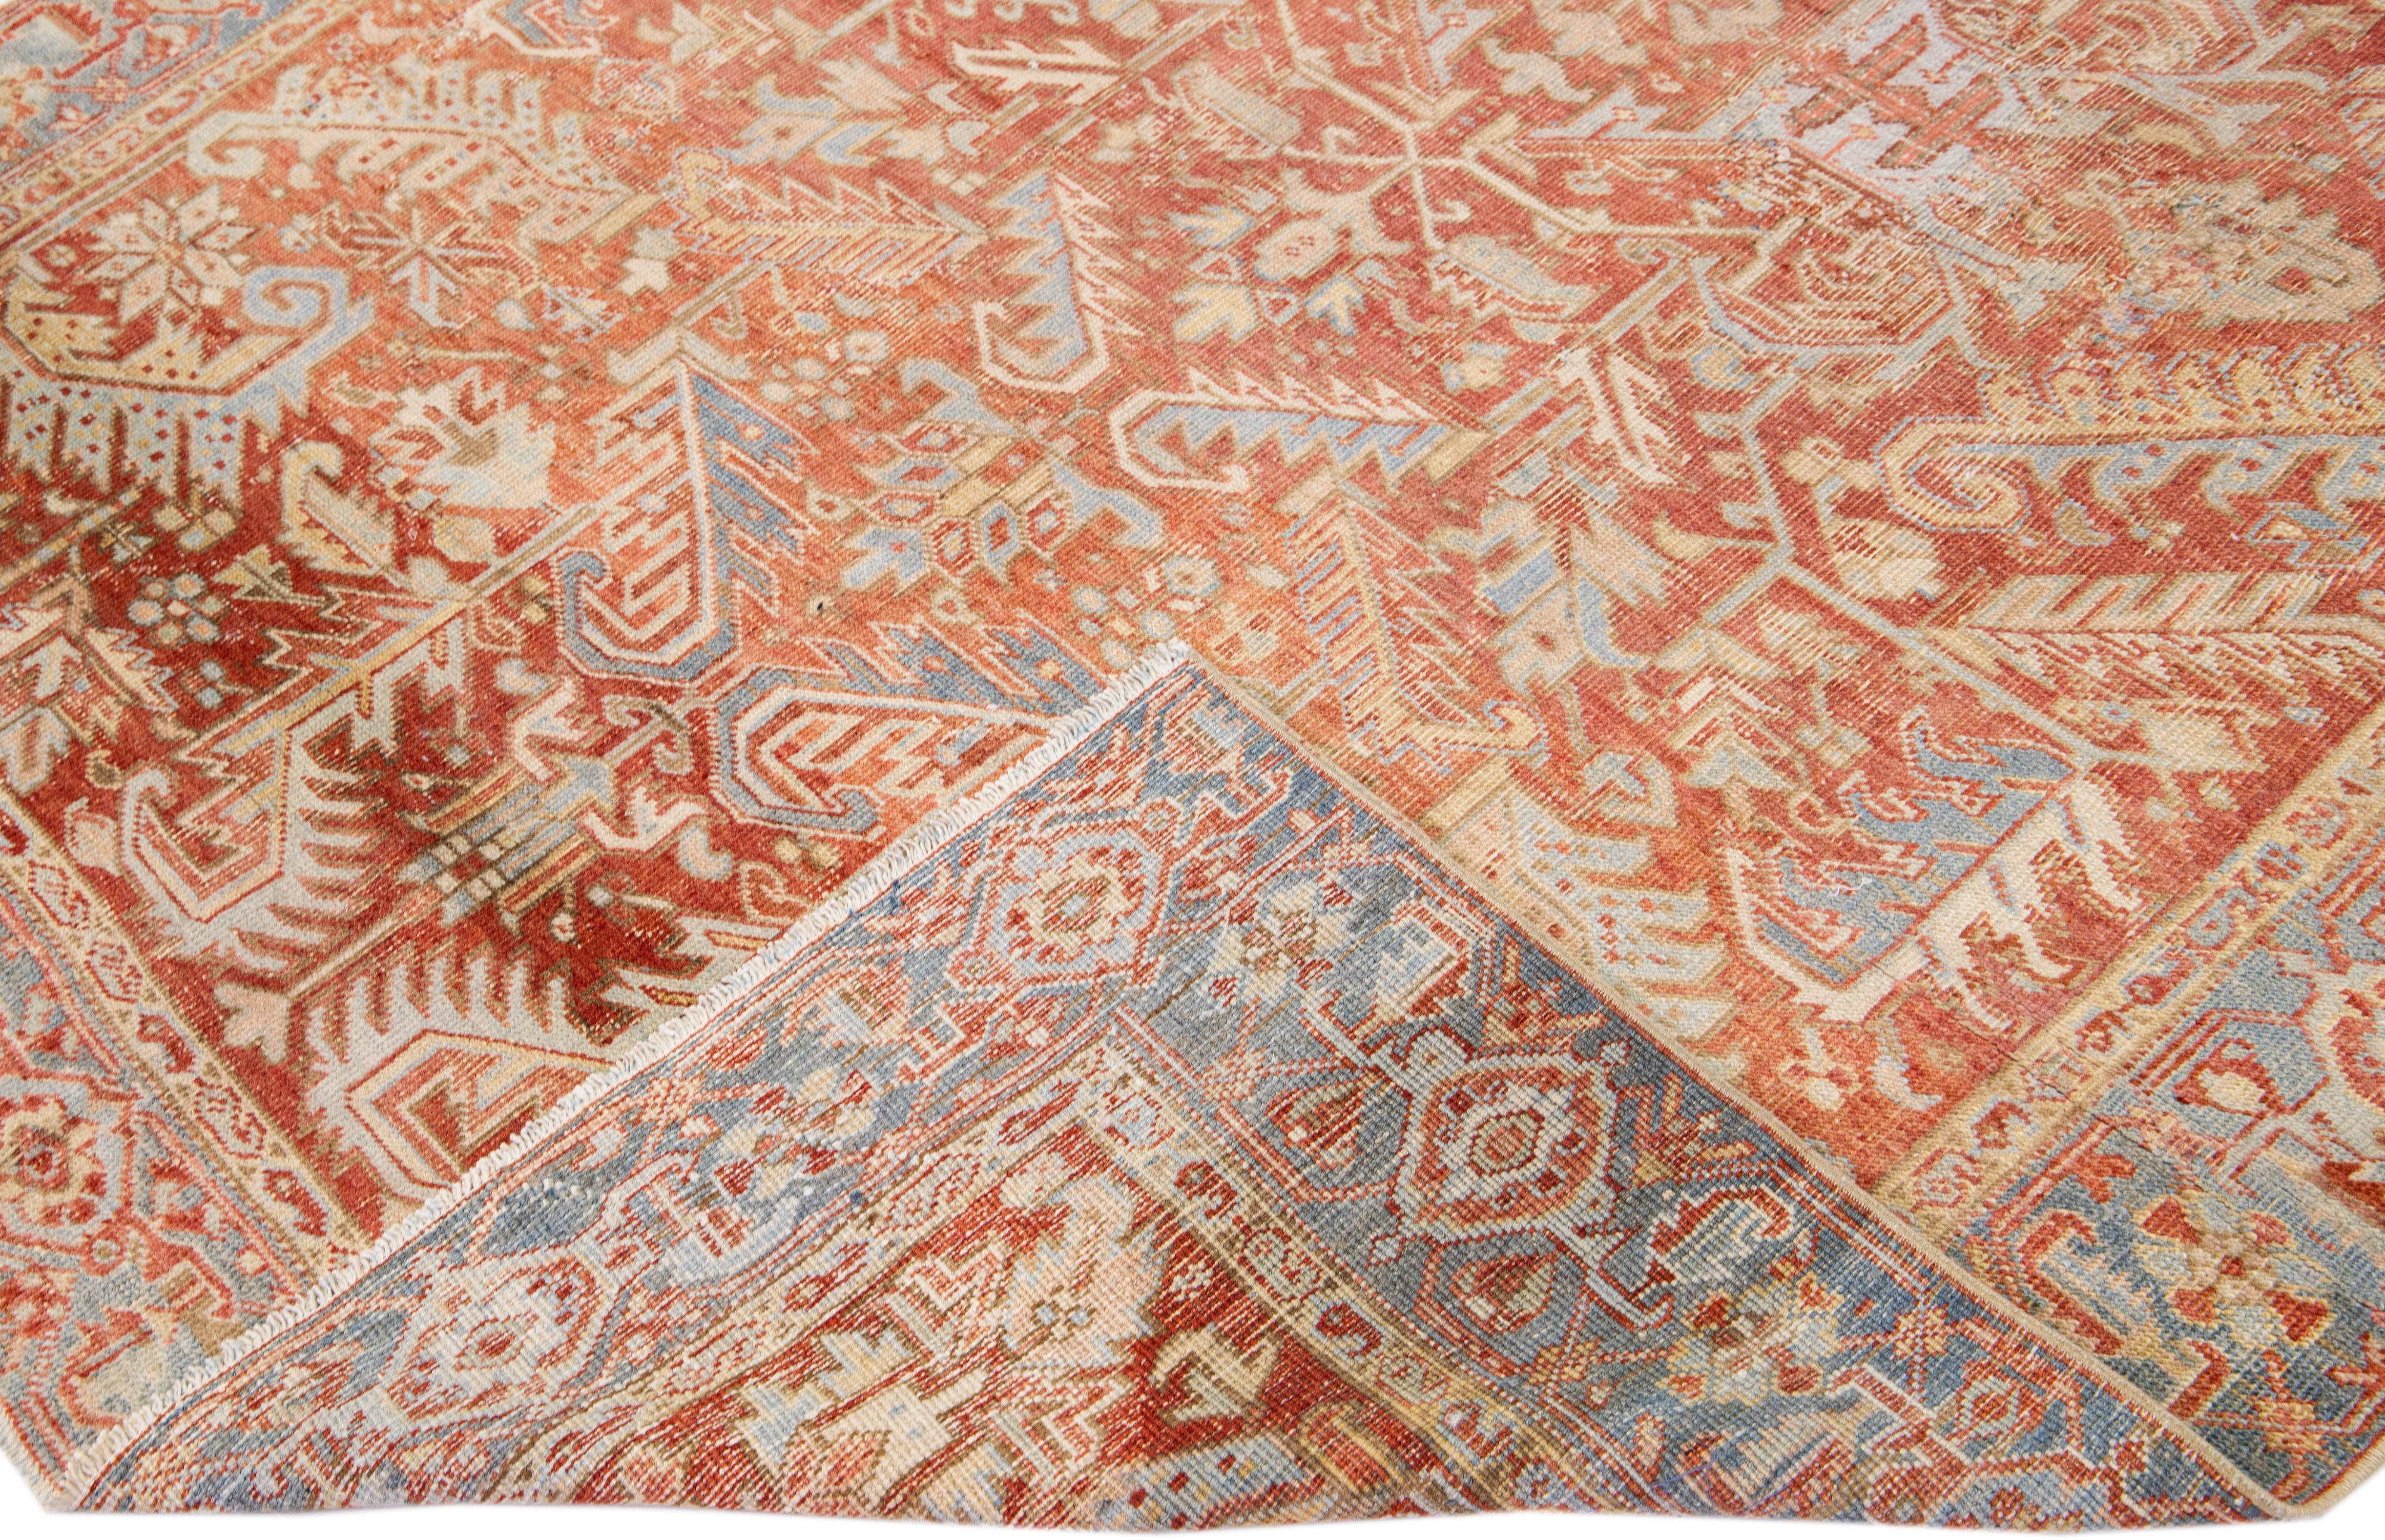 Beautiful antique Heriz hand-knotted wool rug with a rust color field. This Persian rug has a blue frame with beige accents in a gorgeous all-over floral design.

This rug measures: 6'7